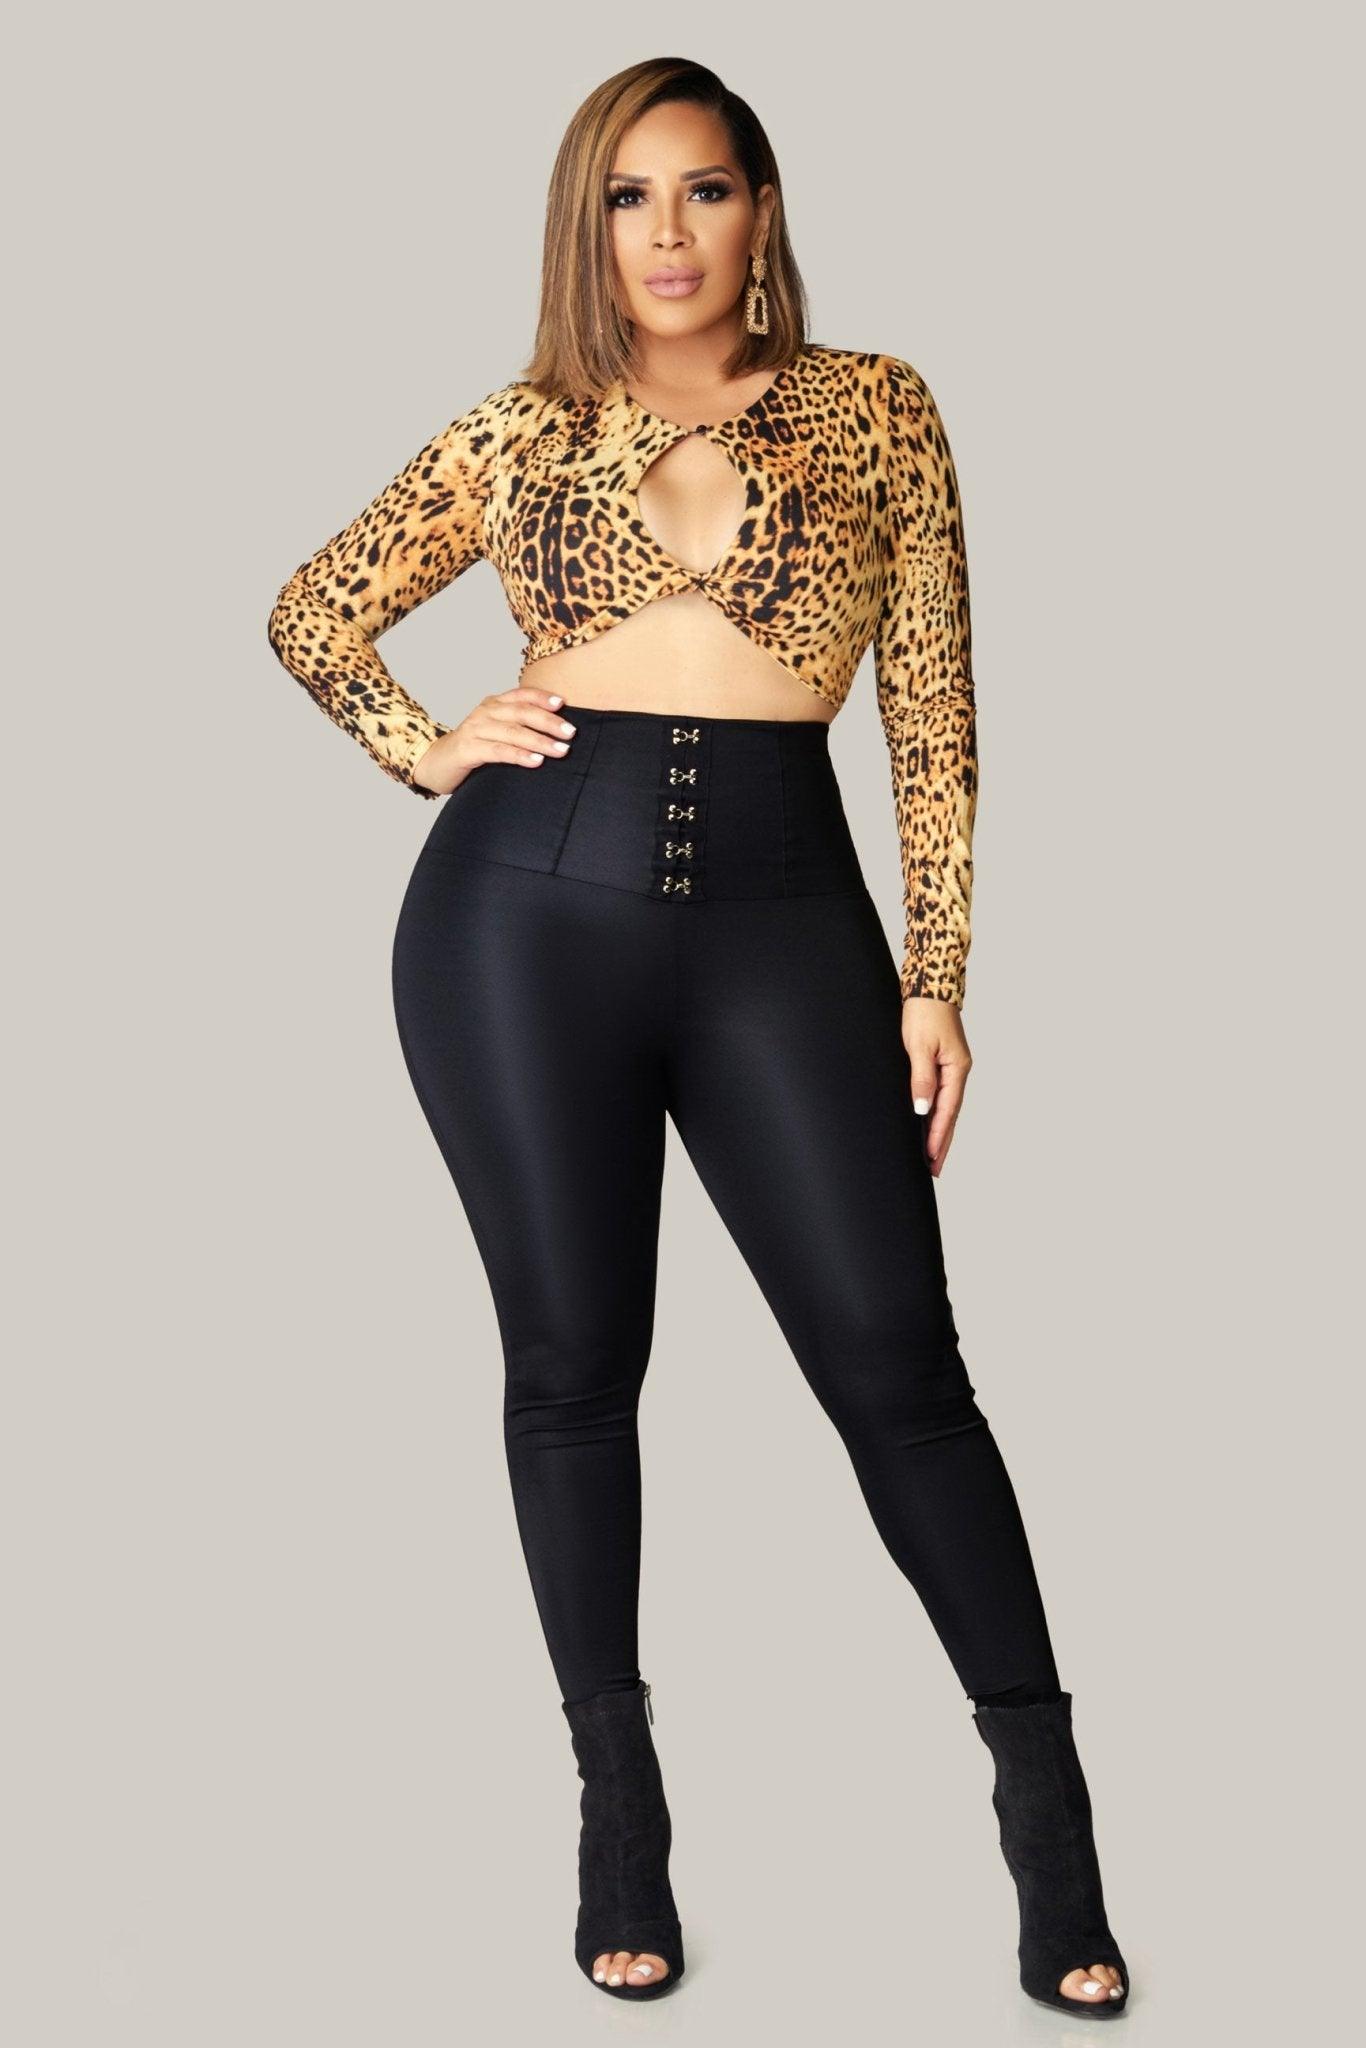 Animal instincts Long Sleeve Crop Top w/ Keyhole Detail - MY SEXY STYLES